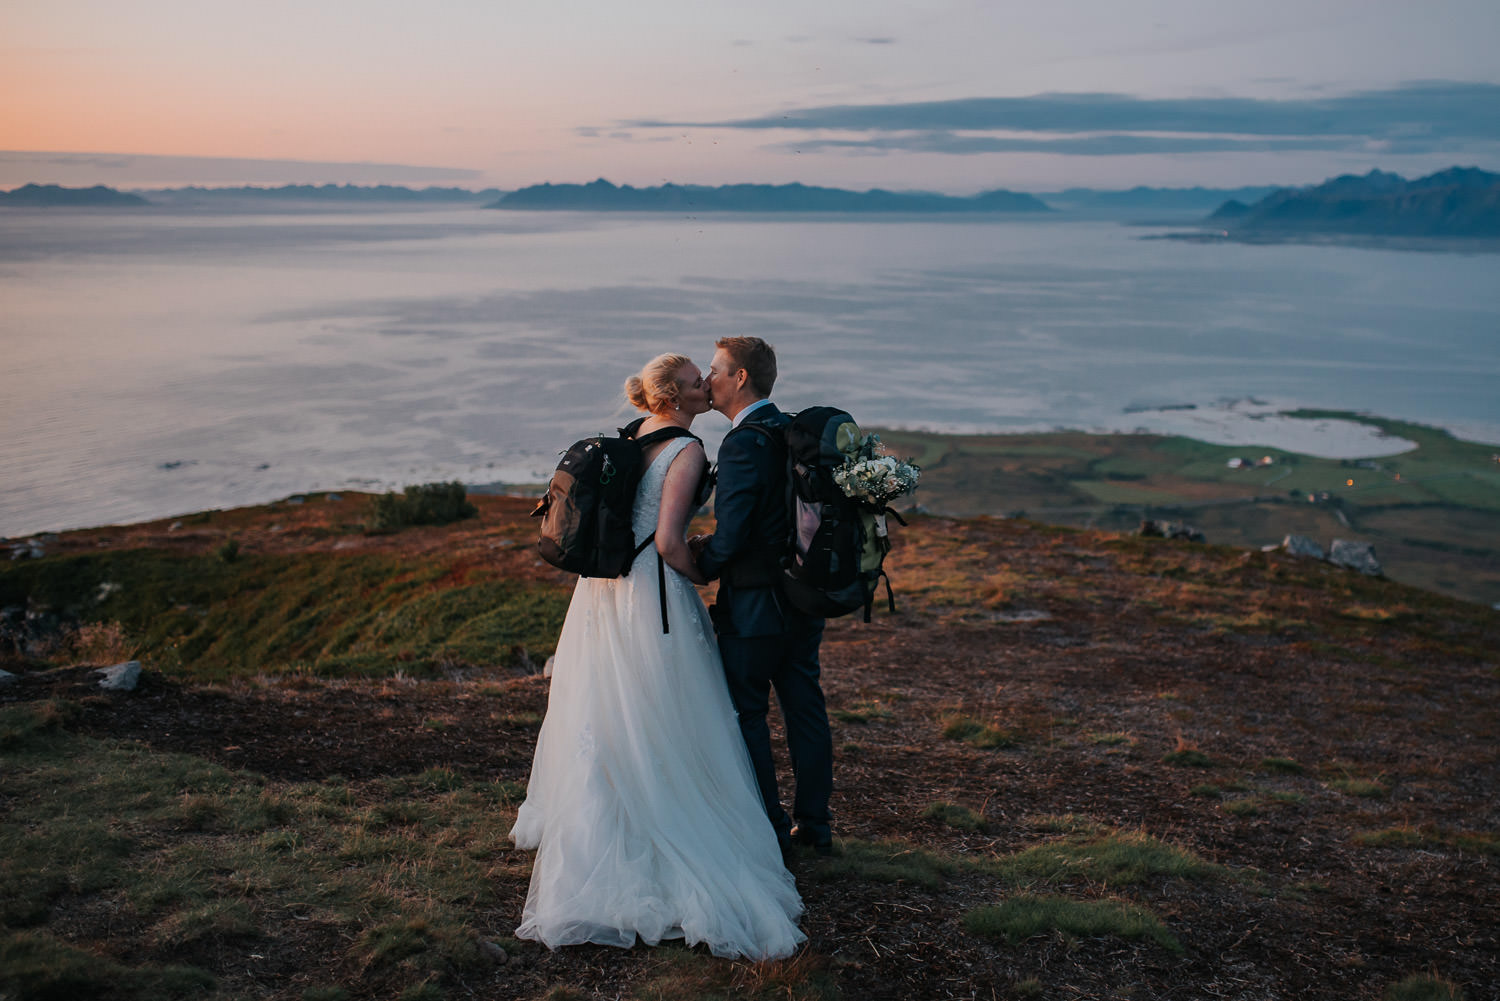 Bride and groom in the mountains of Lofoten in Norway with their backpacks and flowers tucked in the backpack kissing each other at the end of their elopement day